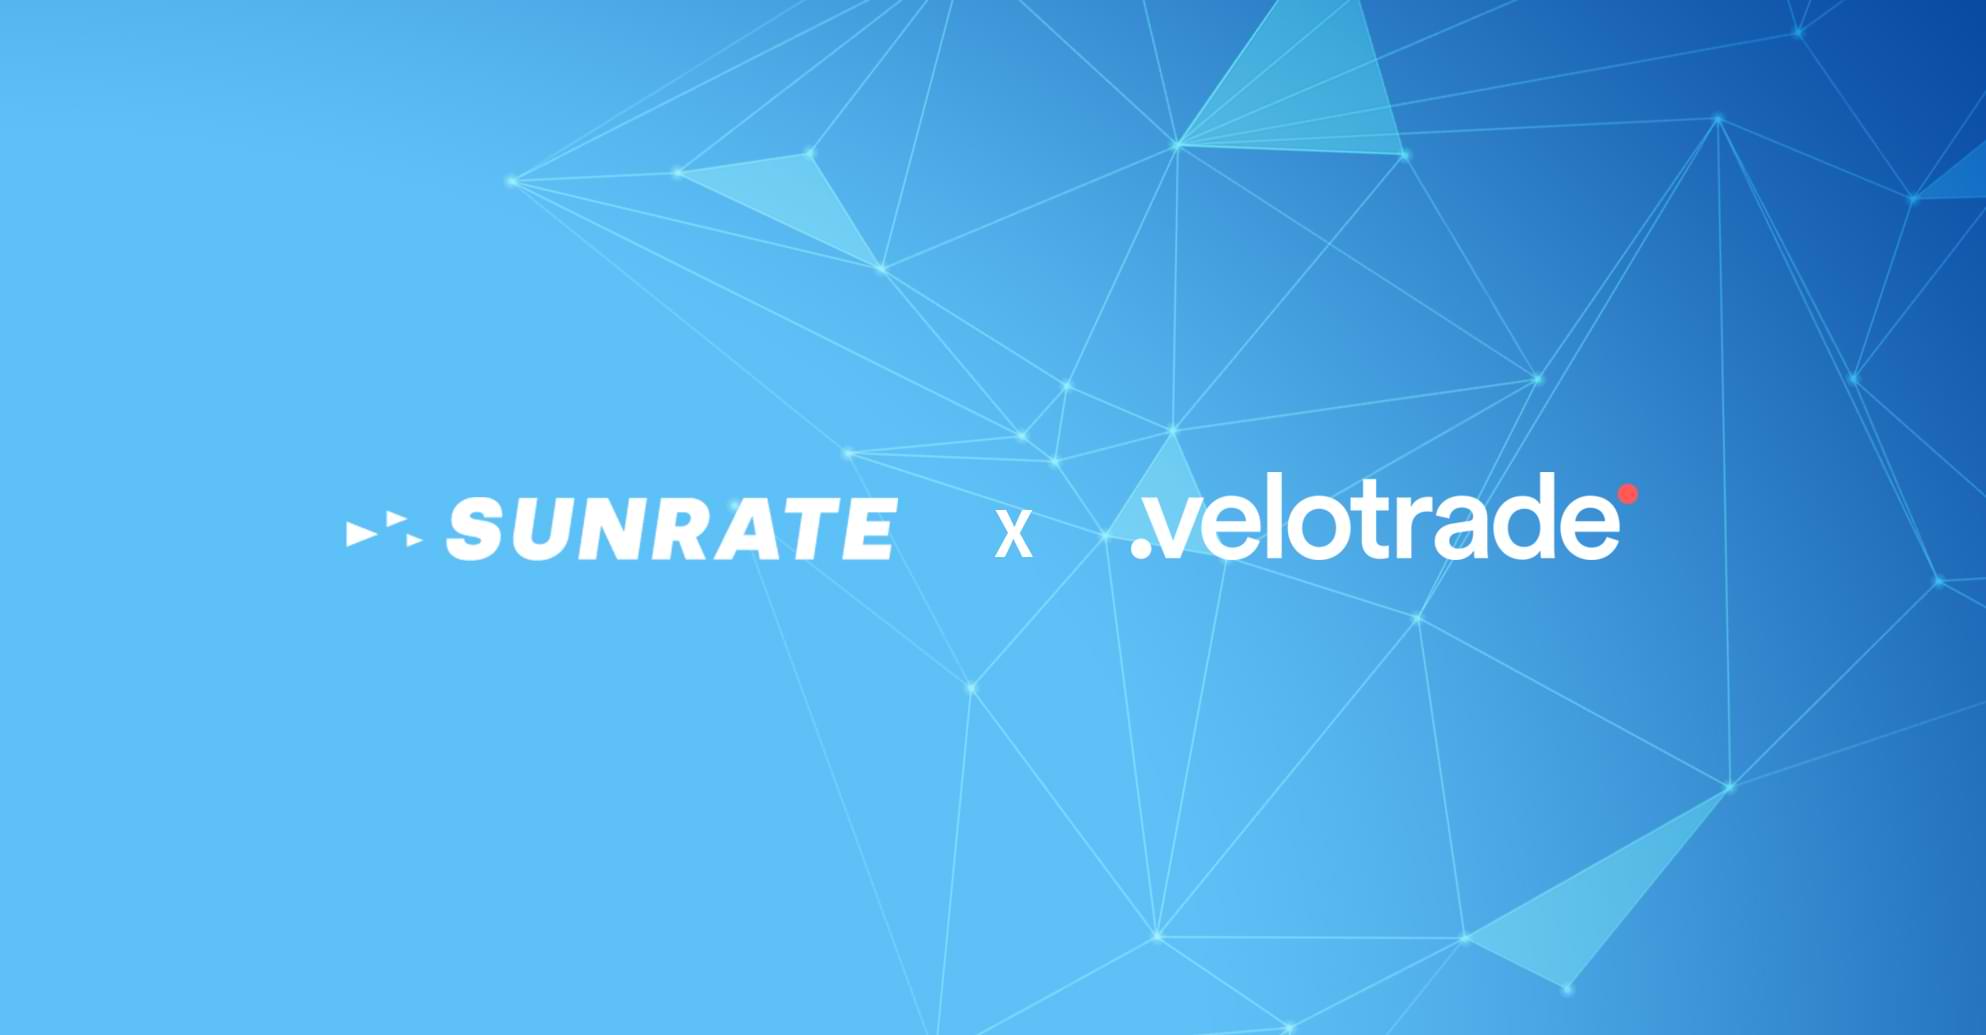 Sunrate and Velotrade partnership announcement